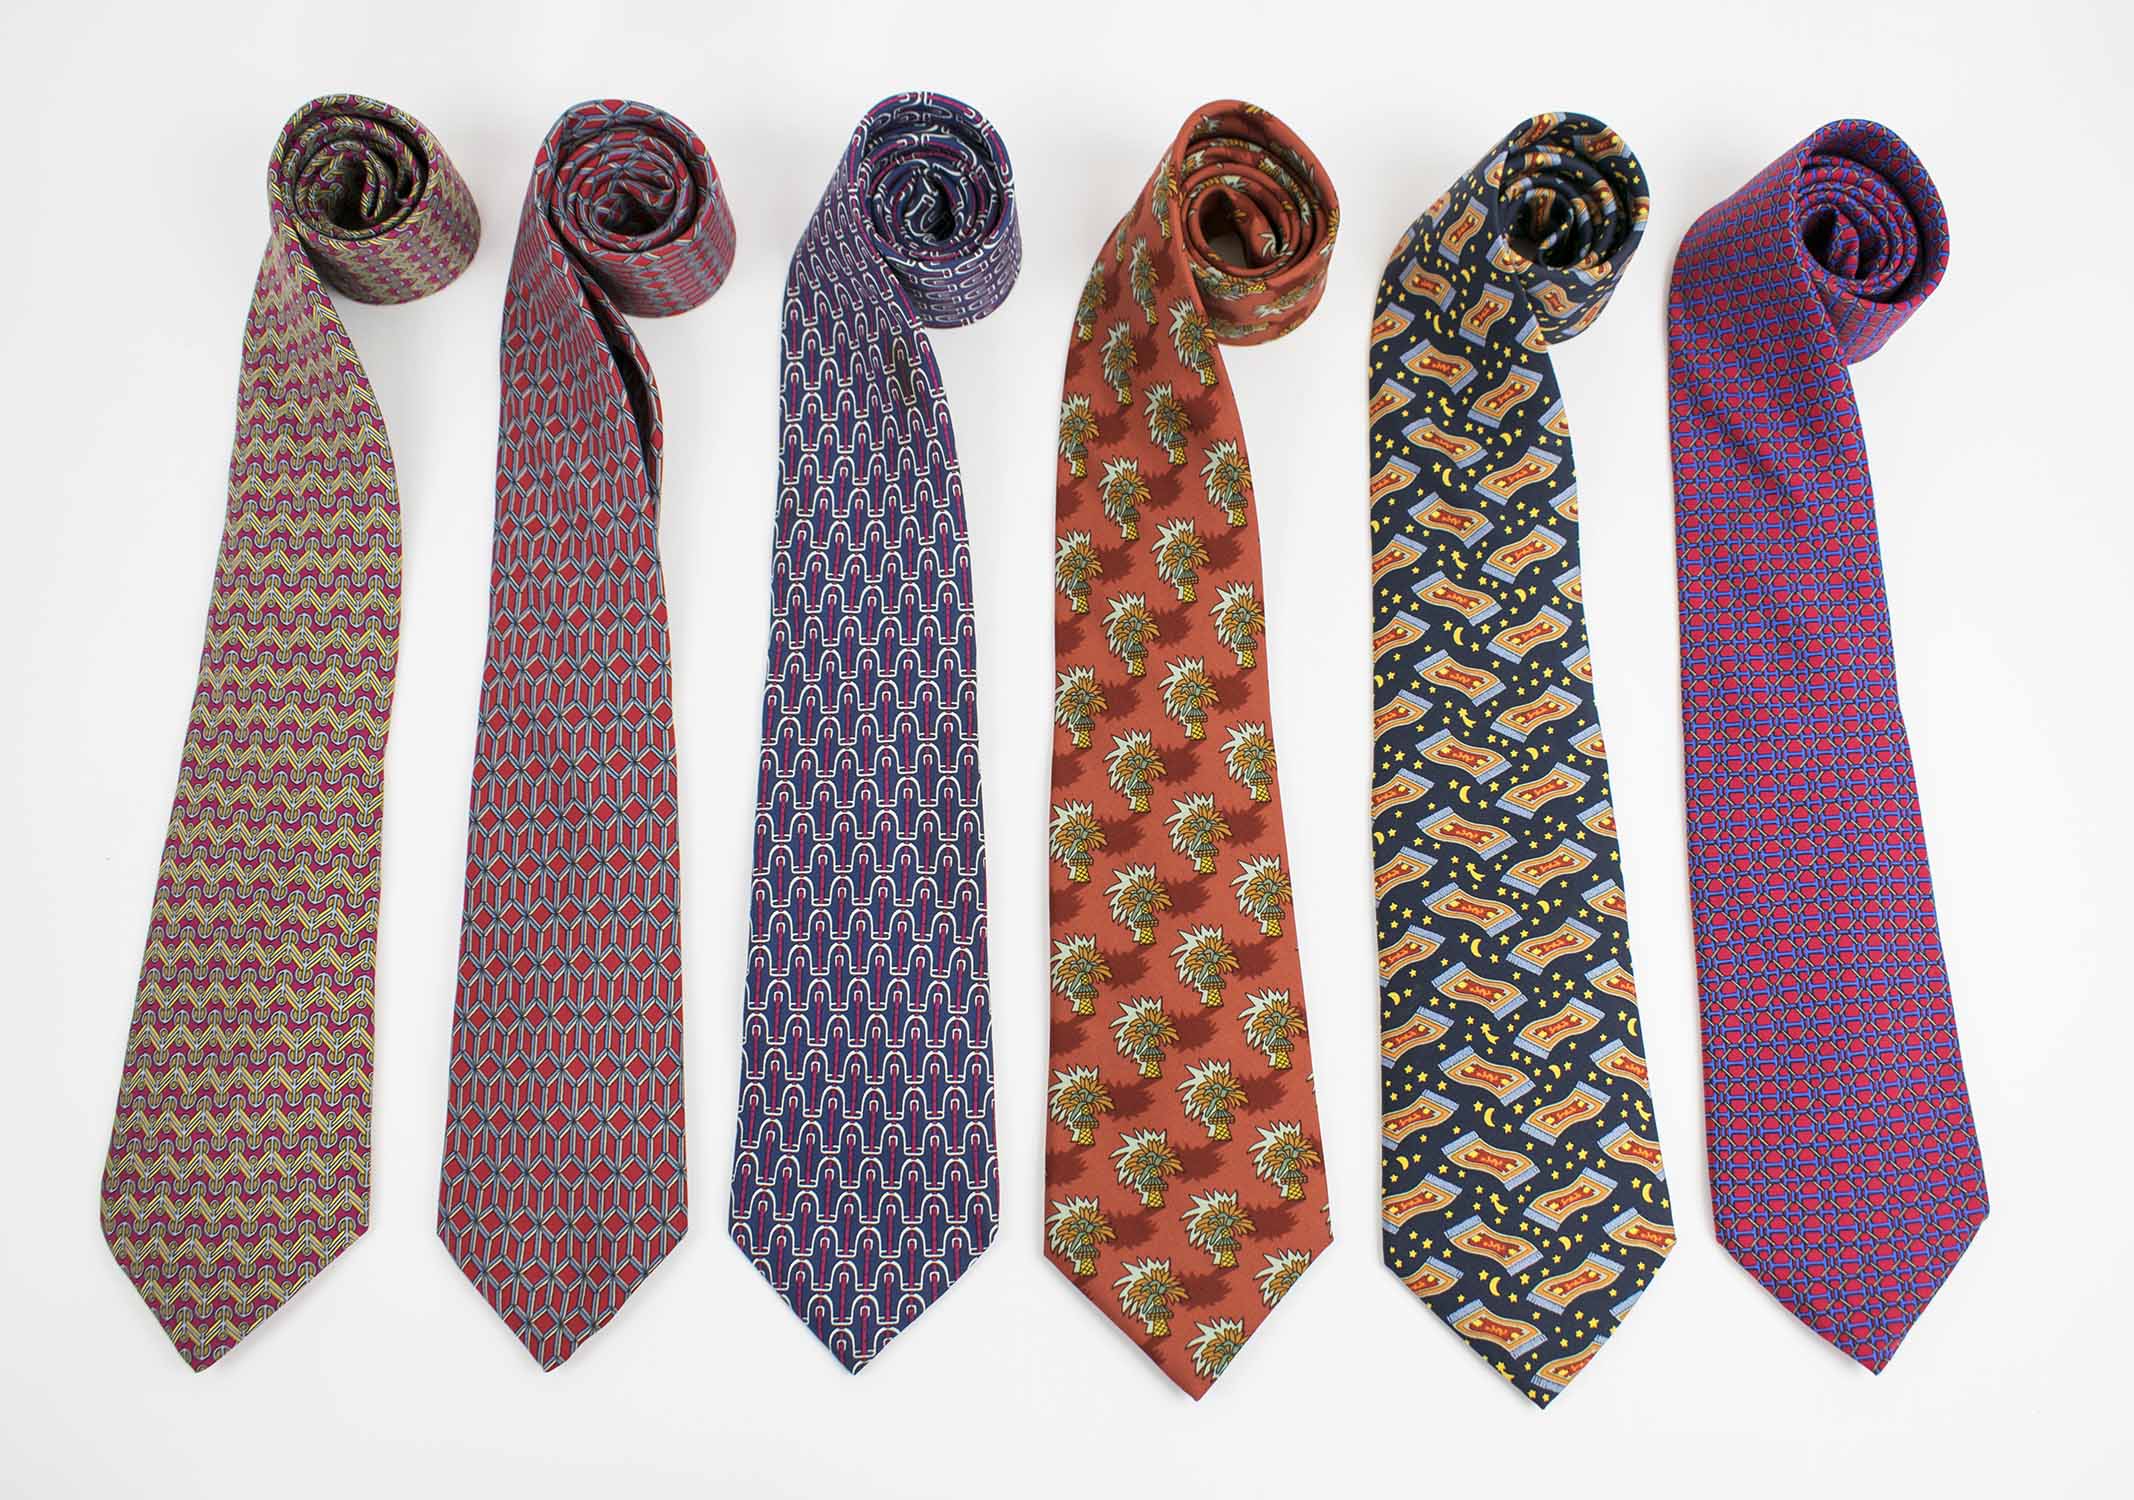 HERMÉS TIES, a collection of six patterned silk ties. (6)